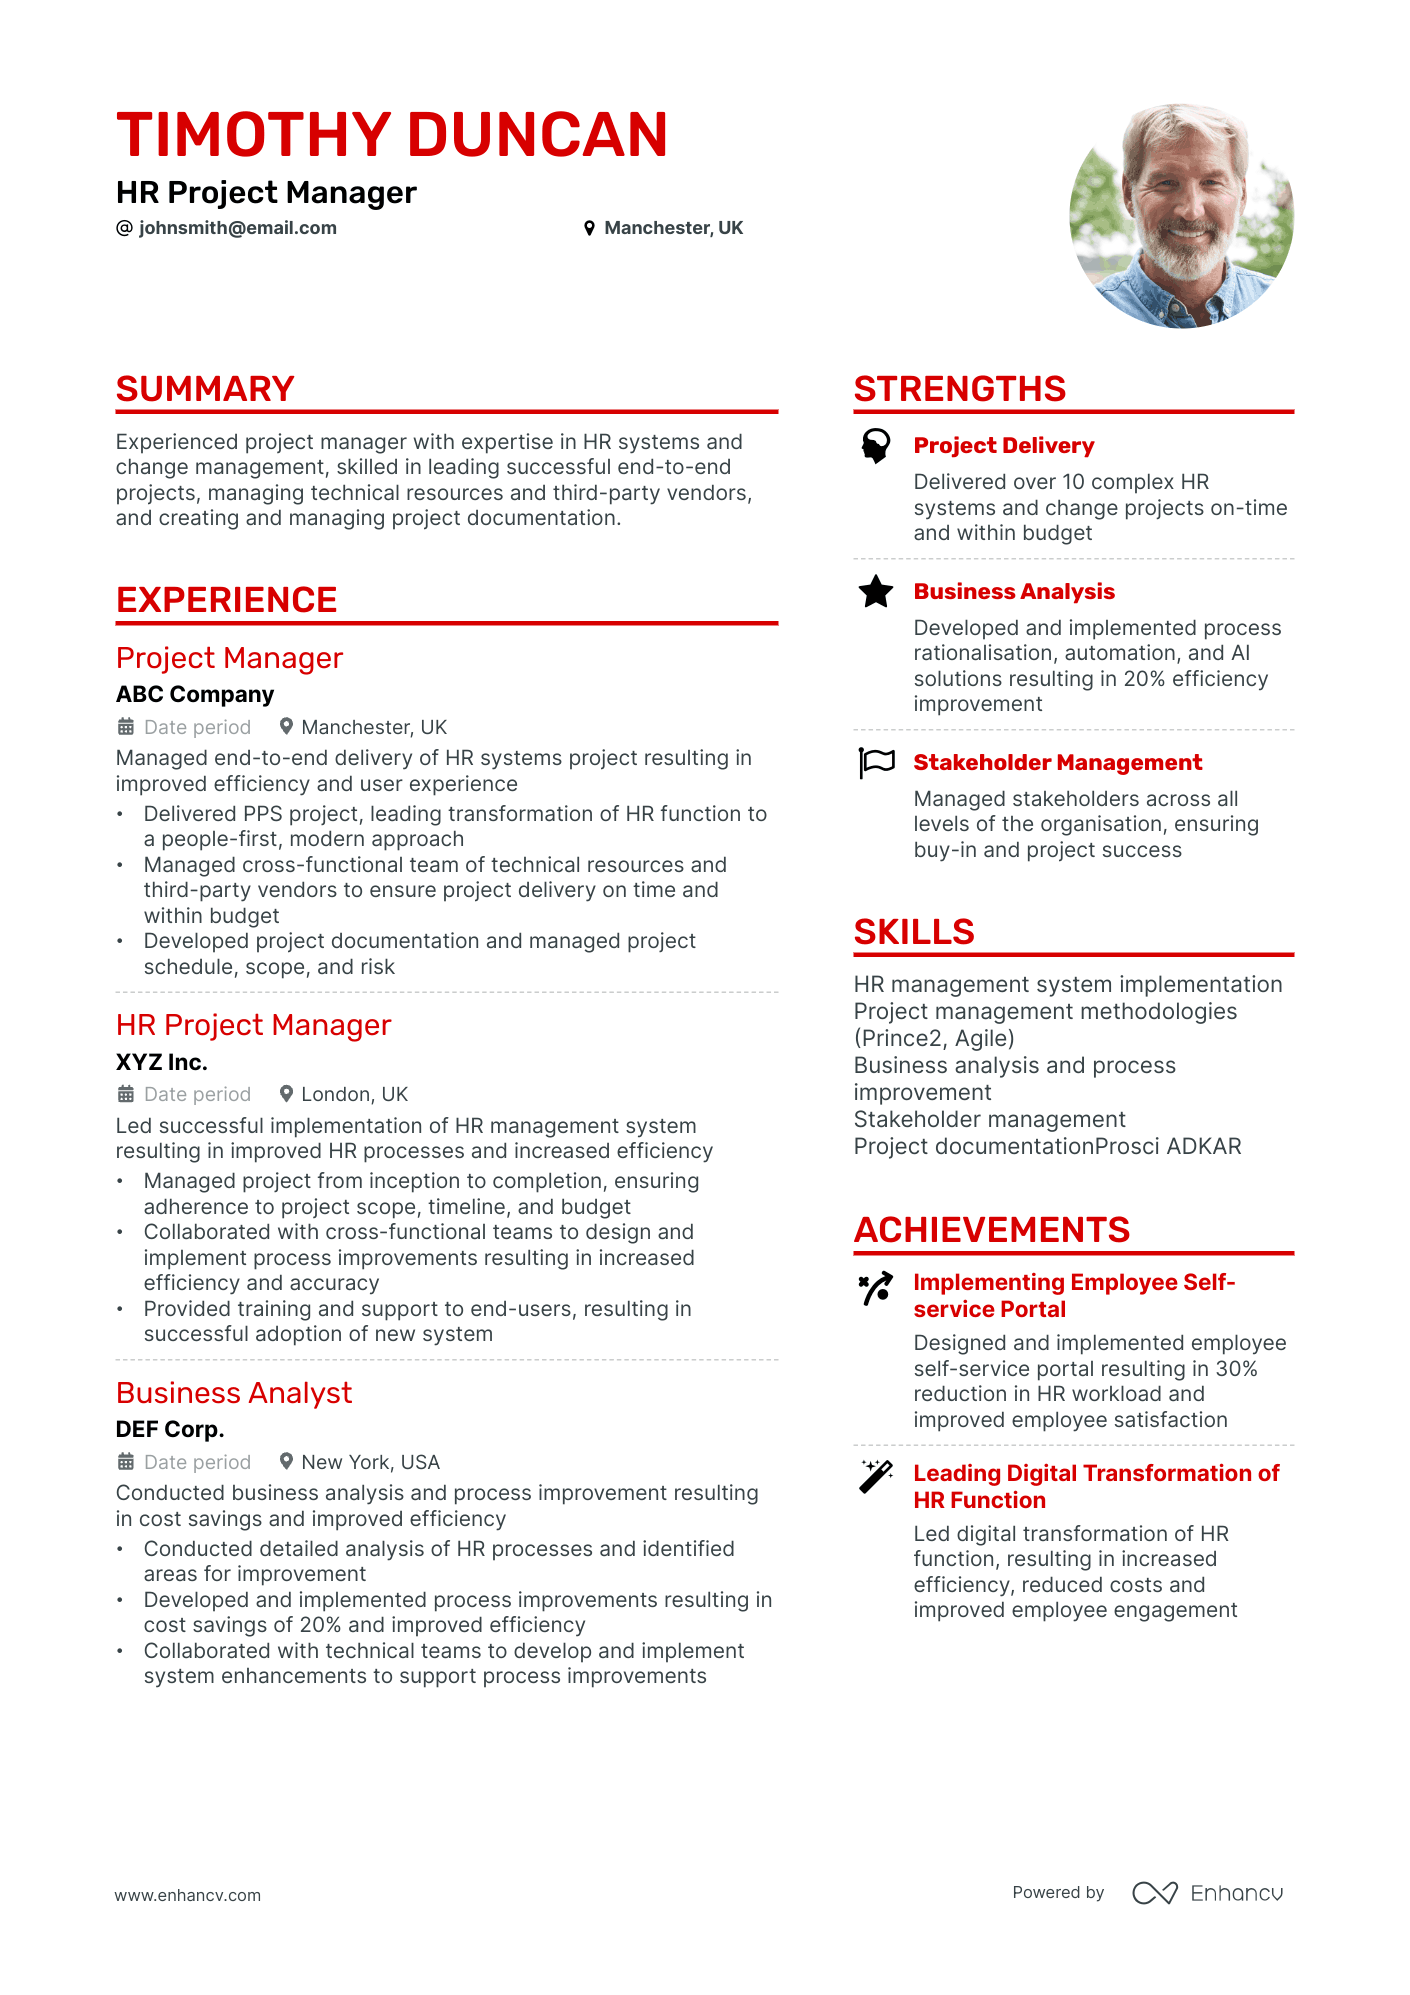 HR Project Manager resume example